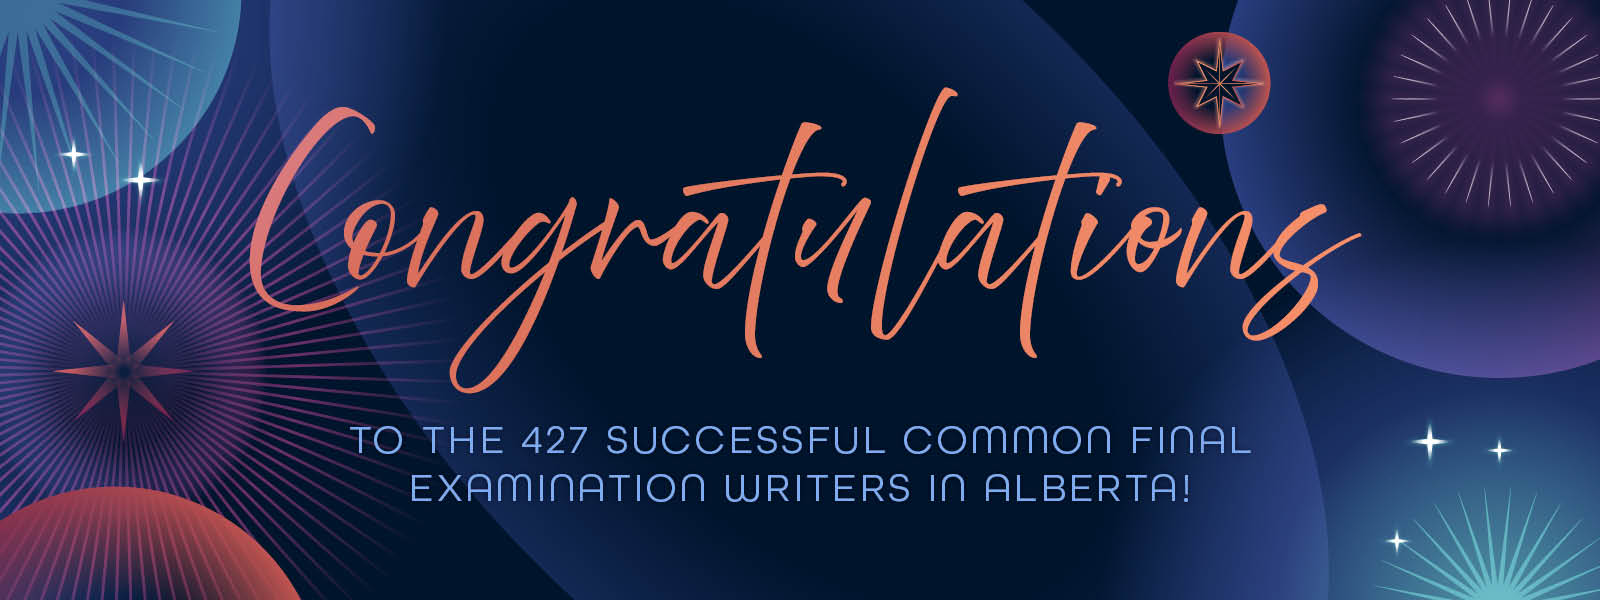  A graphic with a congratulatory message for exam passers. The main text "Congratulations" is in a large, cursive script font in orange, centered on the image. Below, in smaller, sans-serif font, it states "TO THE 427 SUCCESSFUL COMMON FINAL EXAMINATION WRITERS IN ALBERTA!" The background has a dark blue gradient with decorative abstract geometric designs and radiant stars in shades of blue, white, and orange, creating a celebratory and elegant atmosphere.